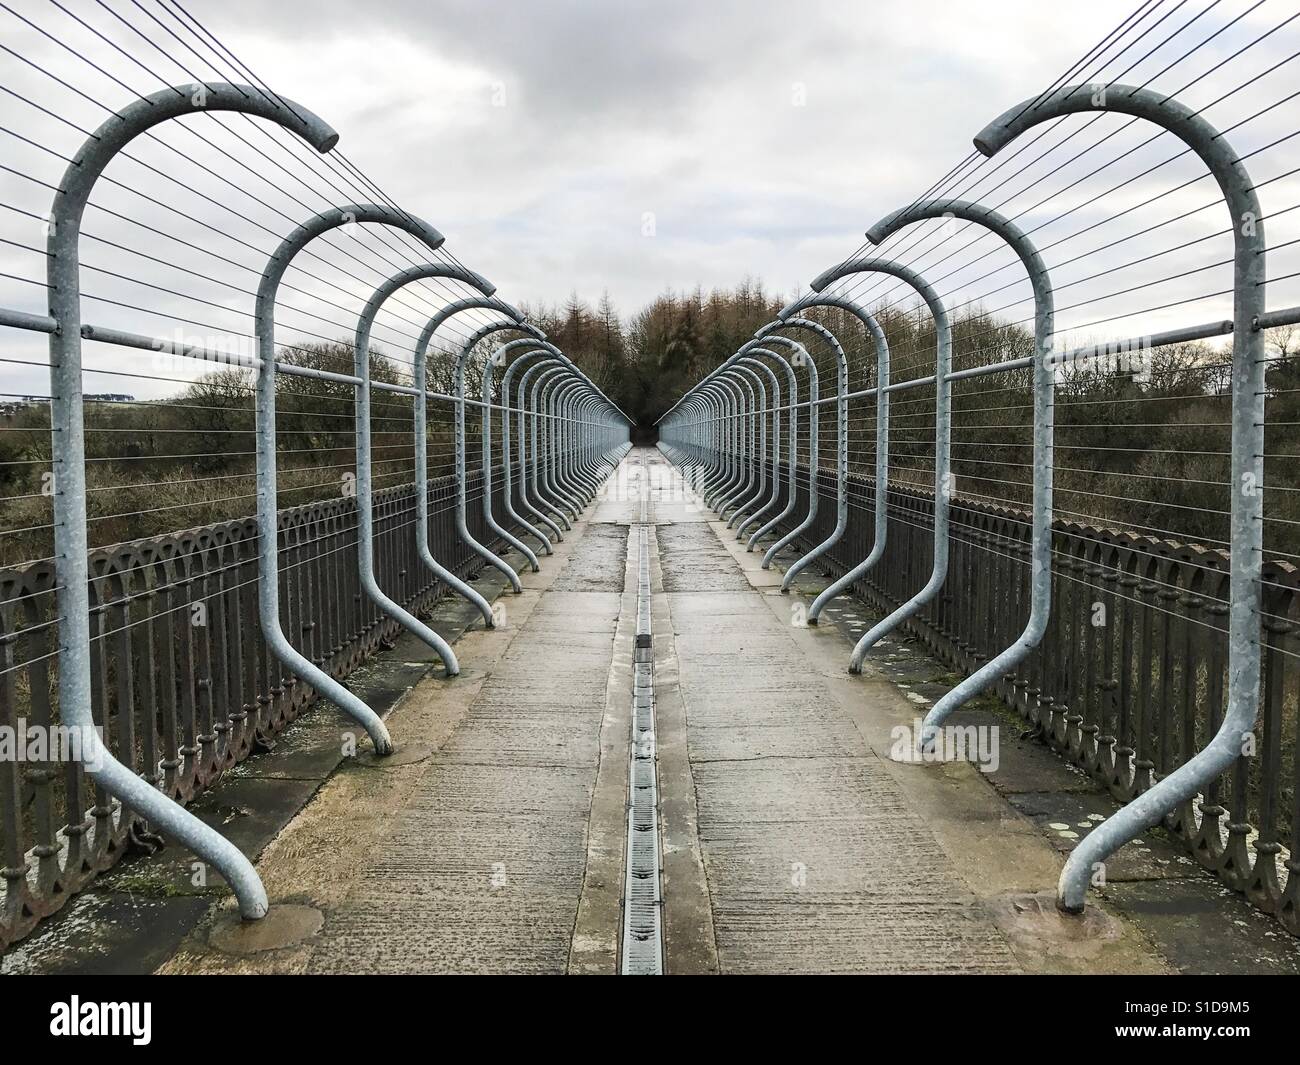 Suicide prevention barriers in place on an old viaduct in County Durham, England. Stock Photo